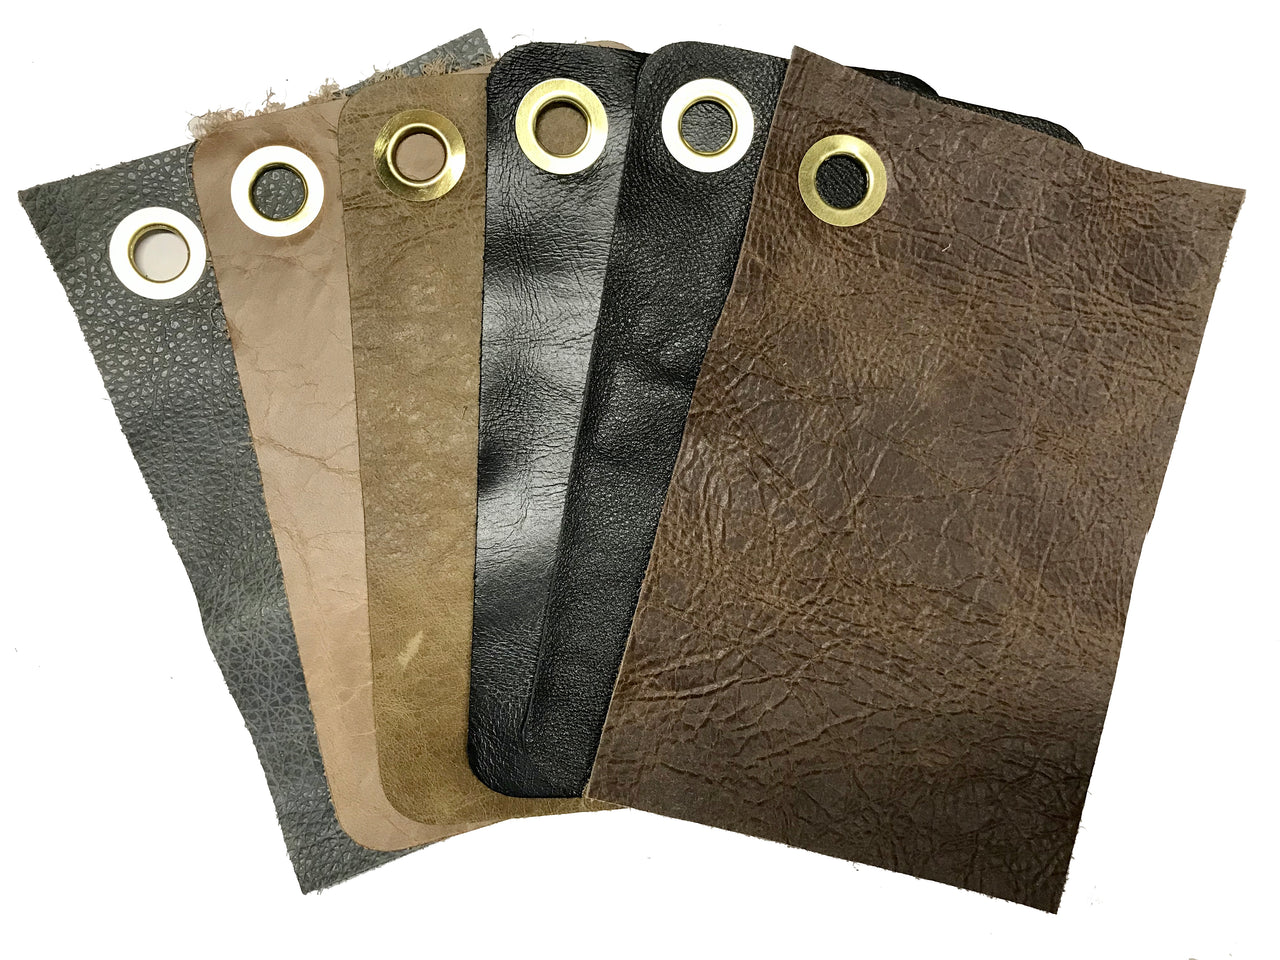 Genuine Cow Leather Swatch Cards - Earthtone Colors Size: 4.5 x 7 - 15 Cards per Set